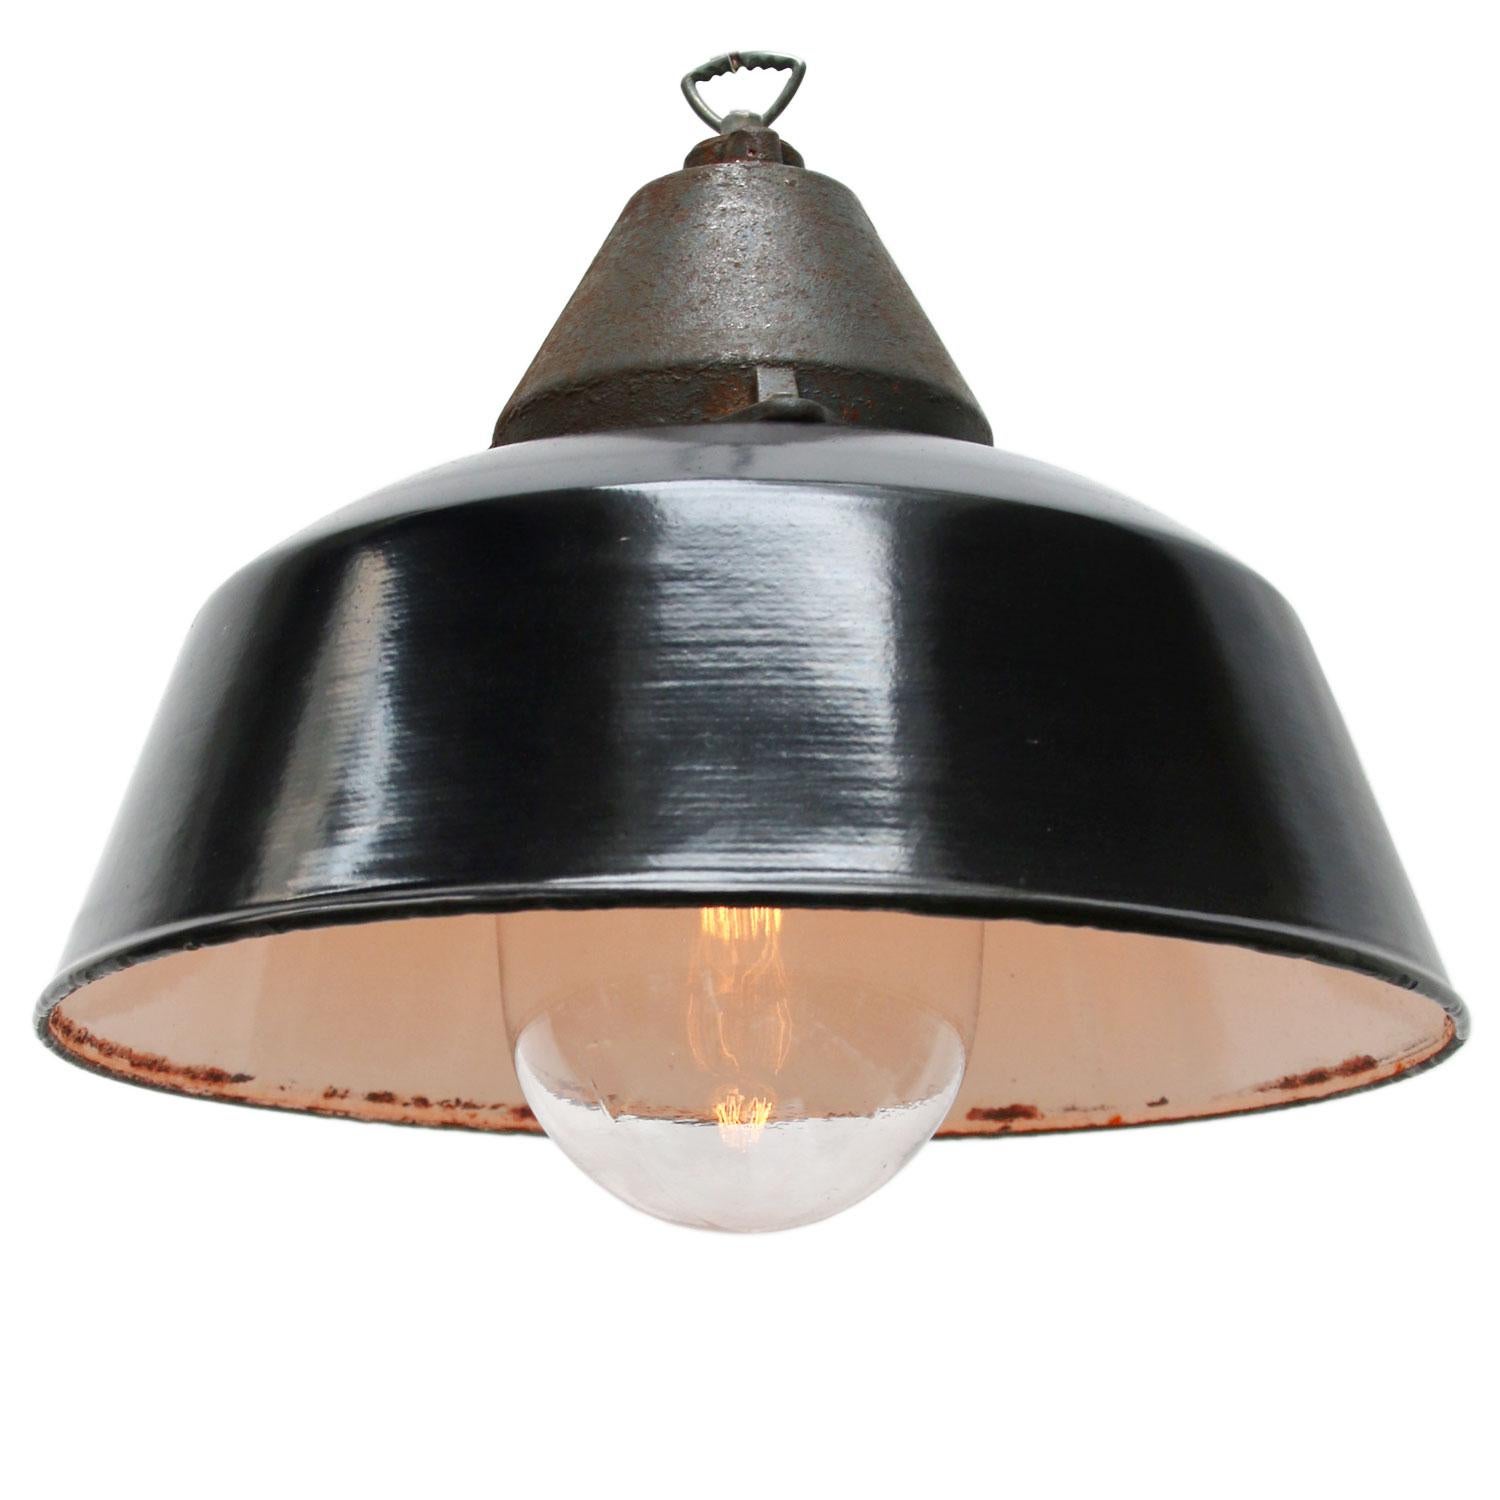 Factory hanging lamp. Black enamel. White interior.
Clear glass. Cast iron top.

Measurement: Weight 5.5 kg / 12.1 lb

Priced per individual item. All lamps have been made suitable by international standards for incandescent light bulbs,